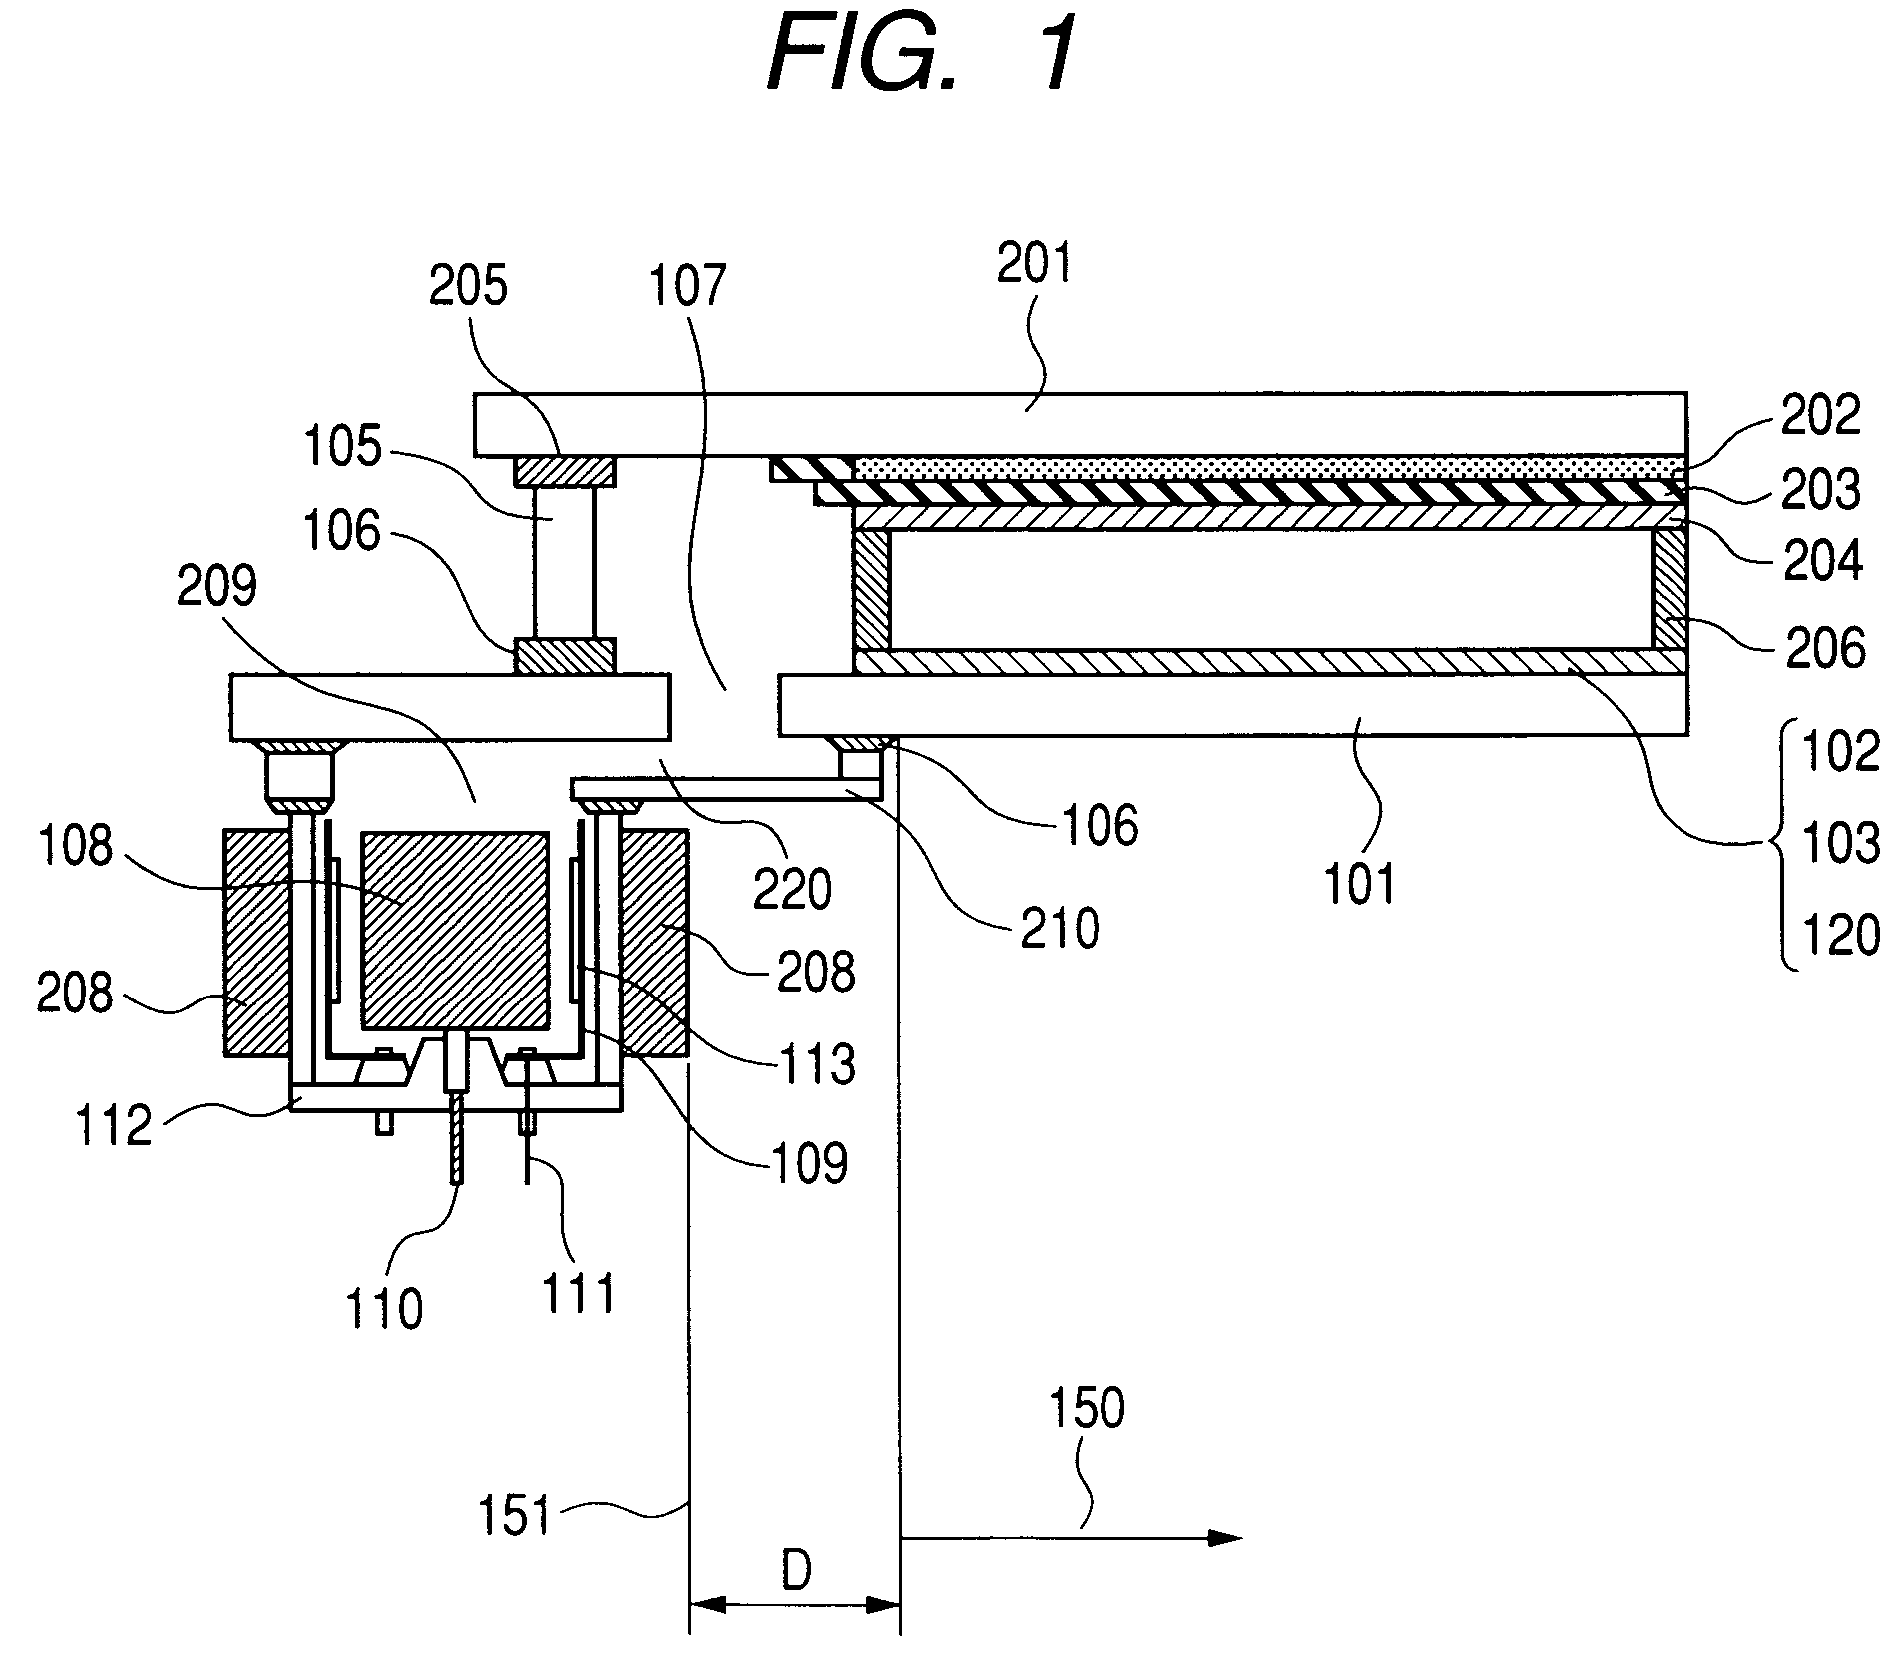 Image display apparatus with particular ion pump location